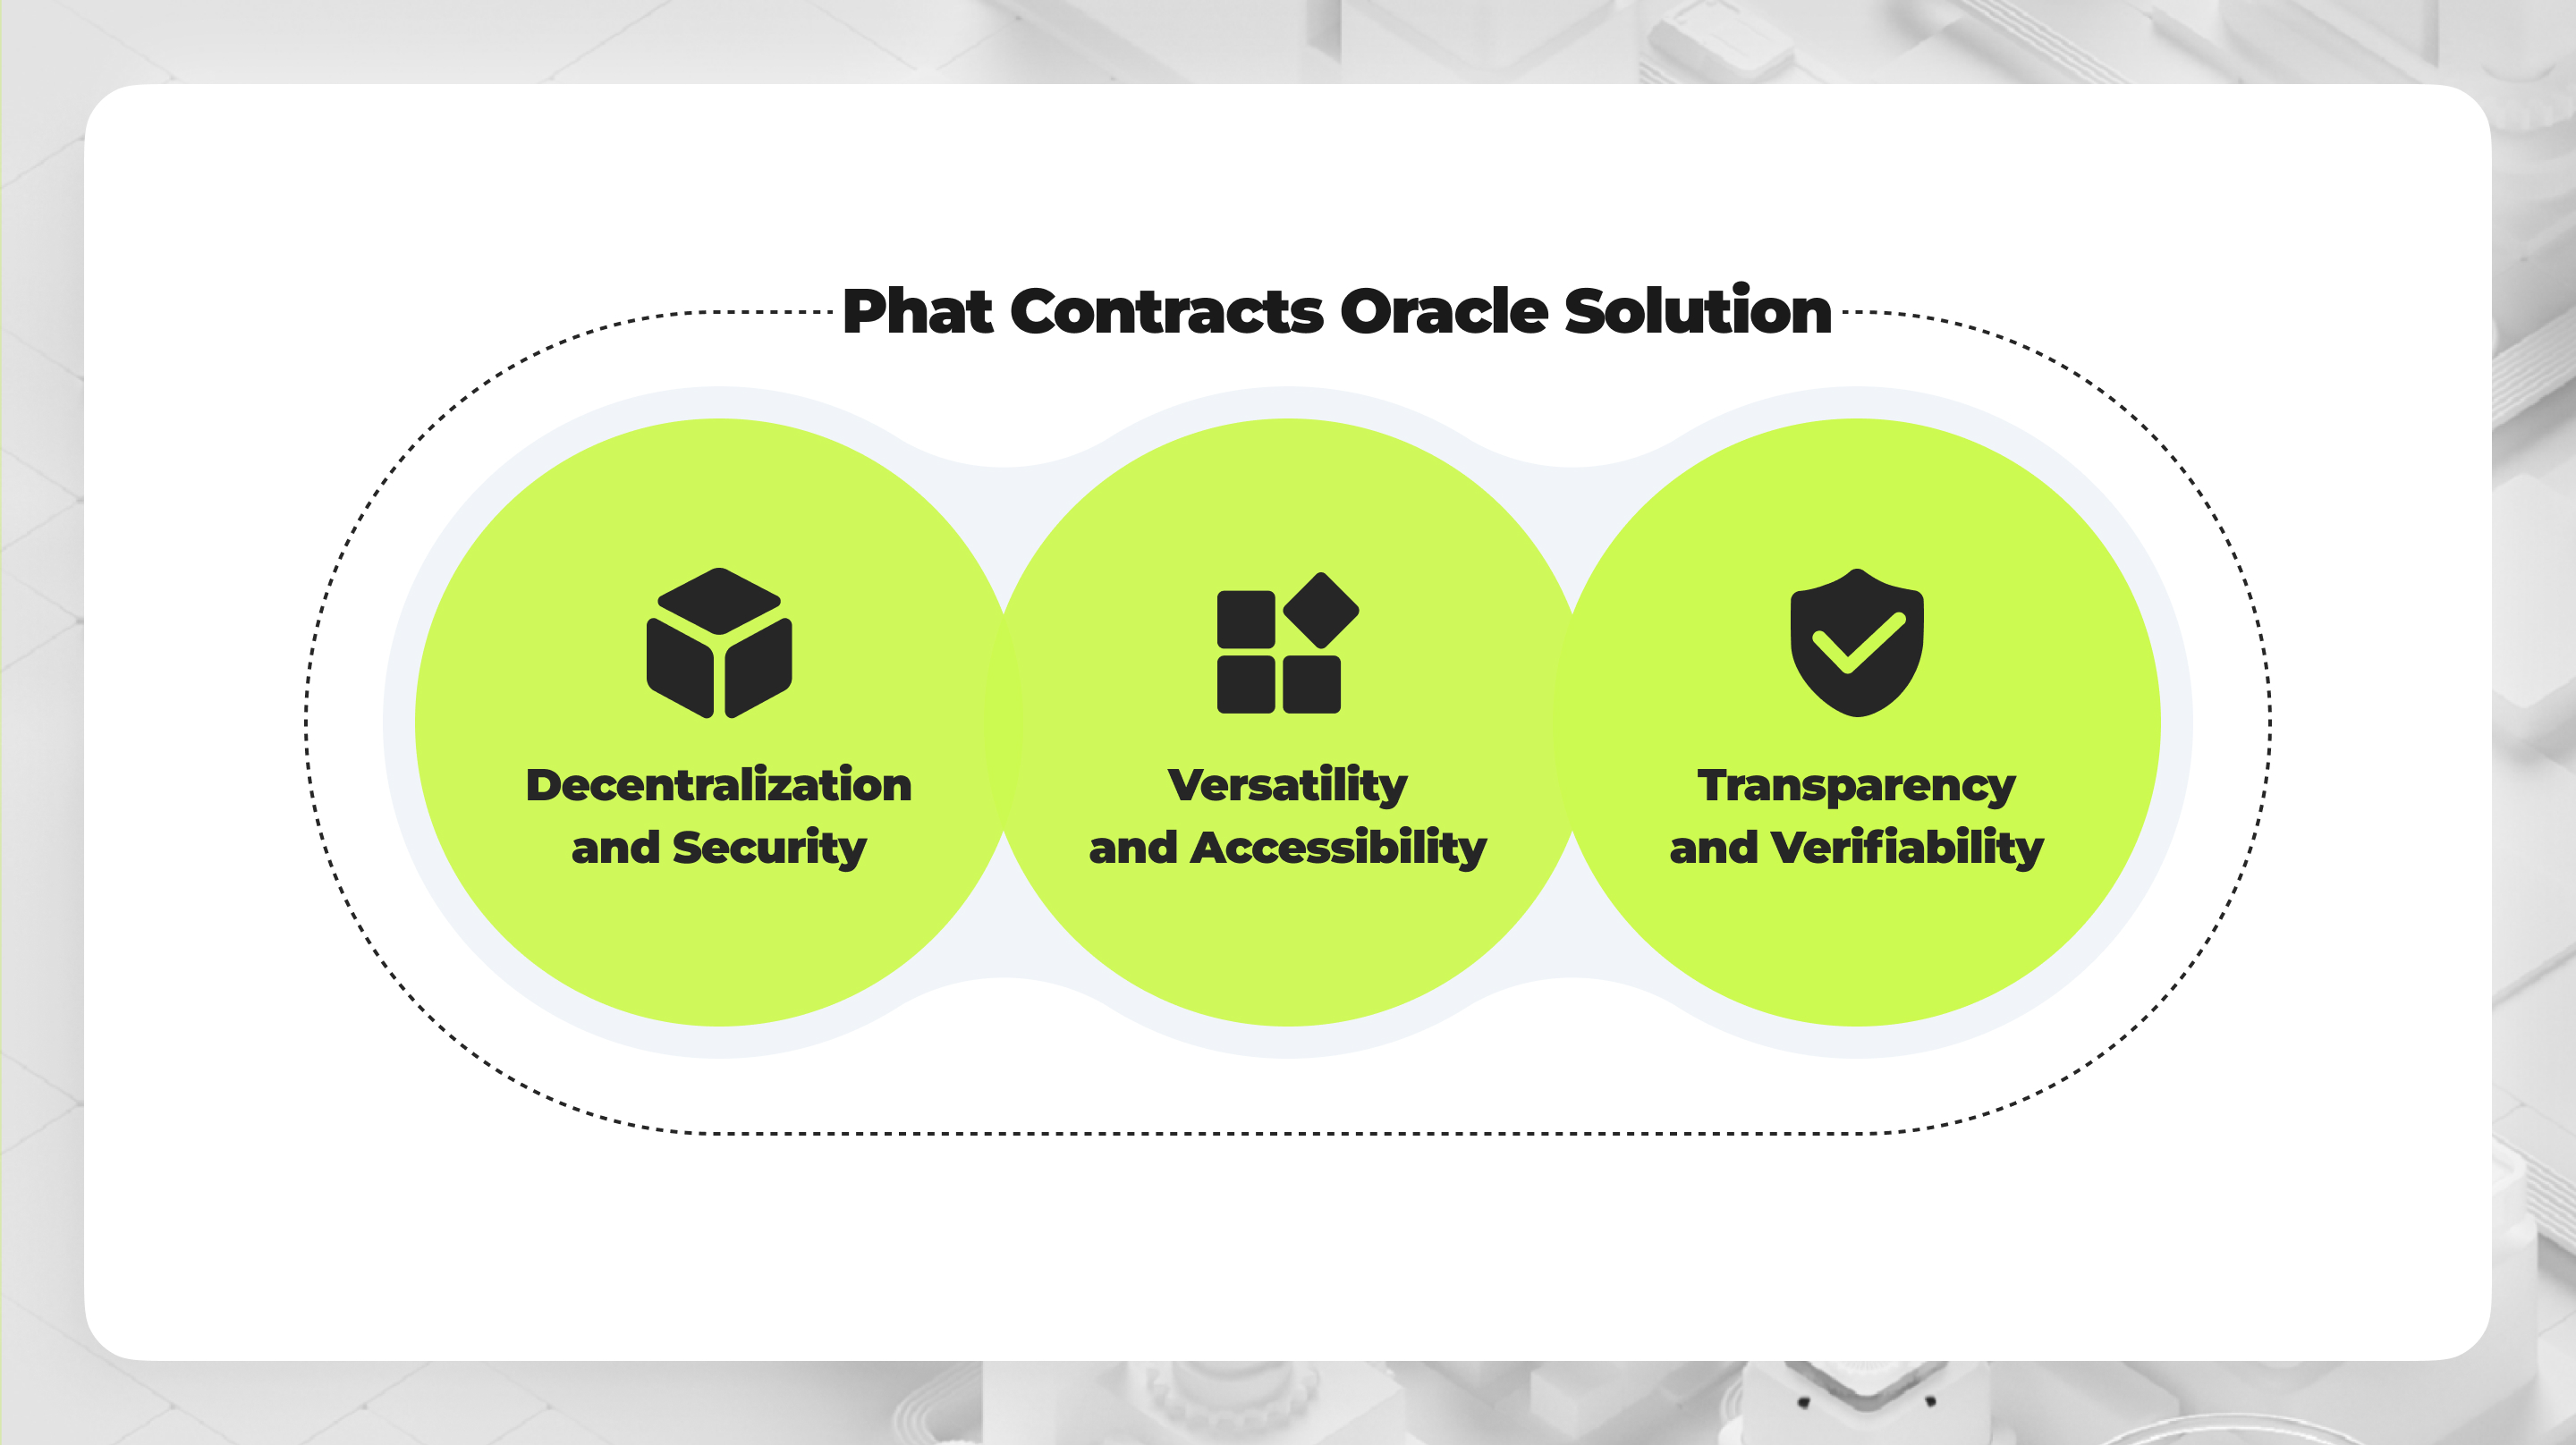 Advantages of Phat Contract oracle solution when compared to centralized and semi-centralized solutions.